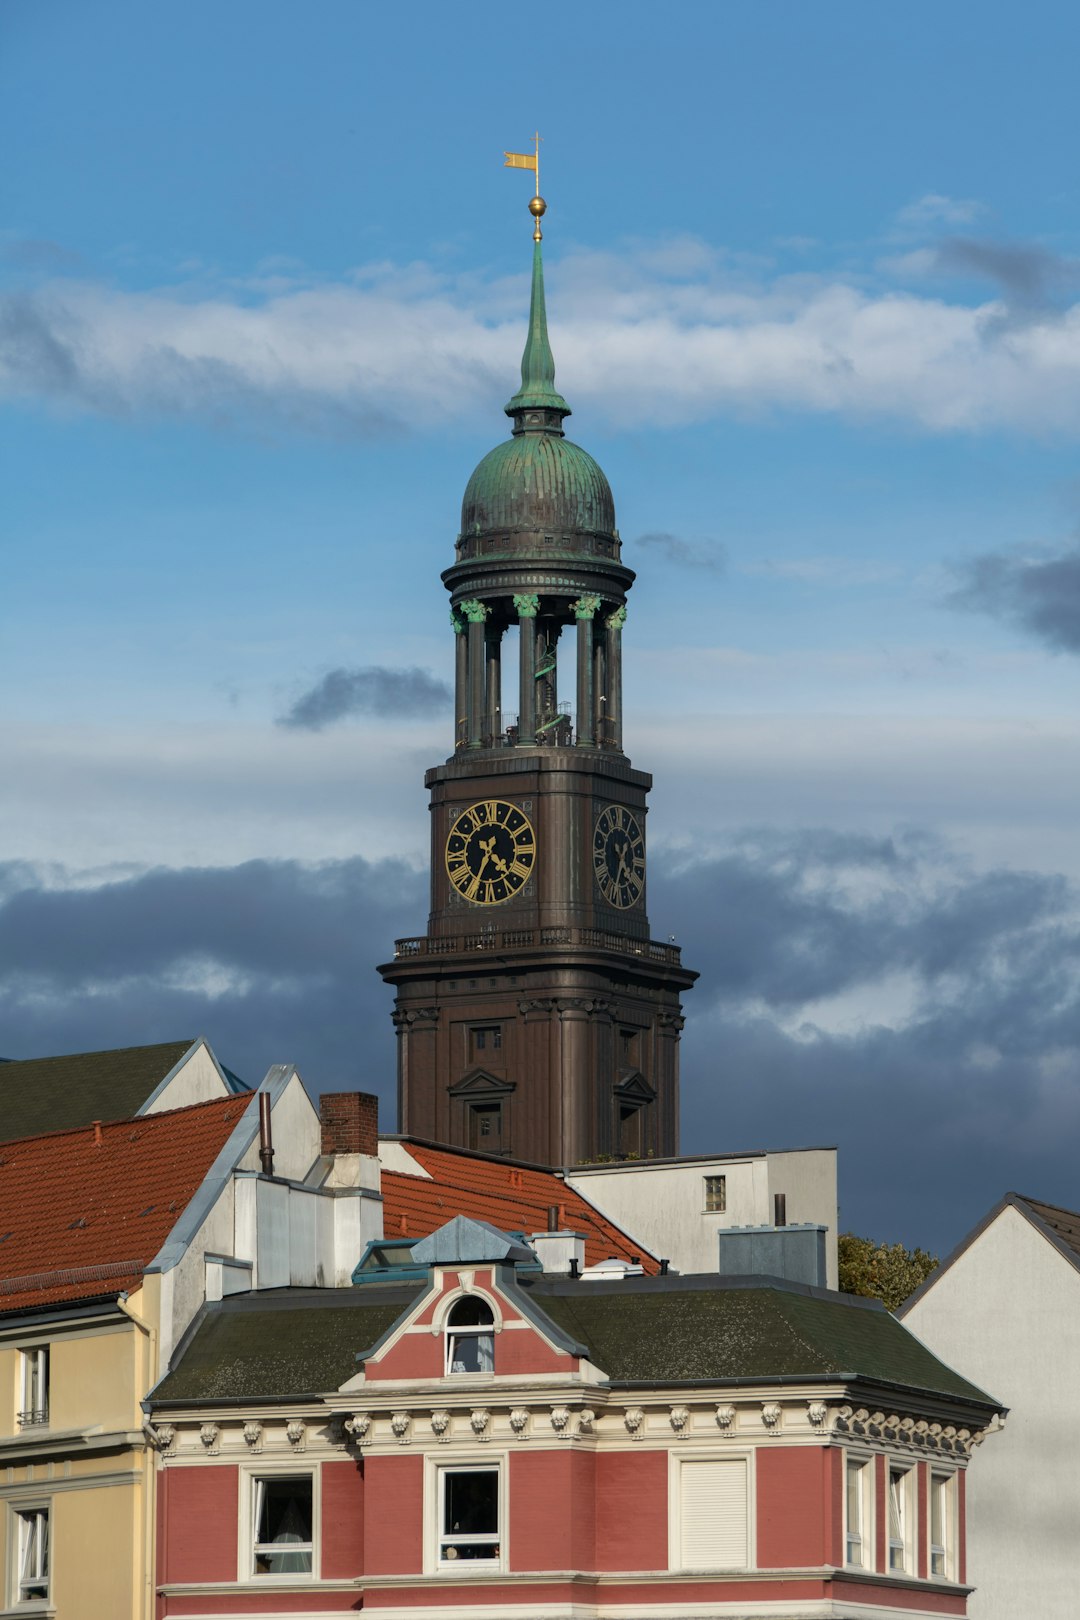 Travel Tips and Stories of St. Michael's Church in Germany